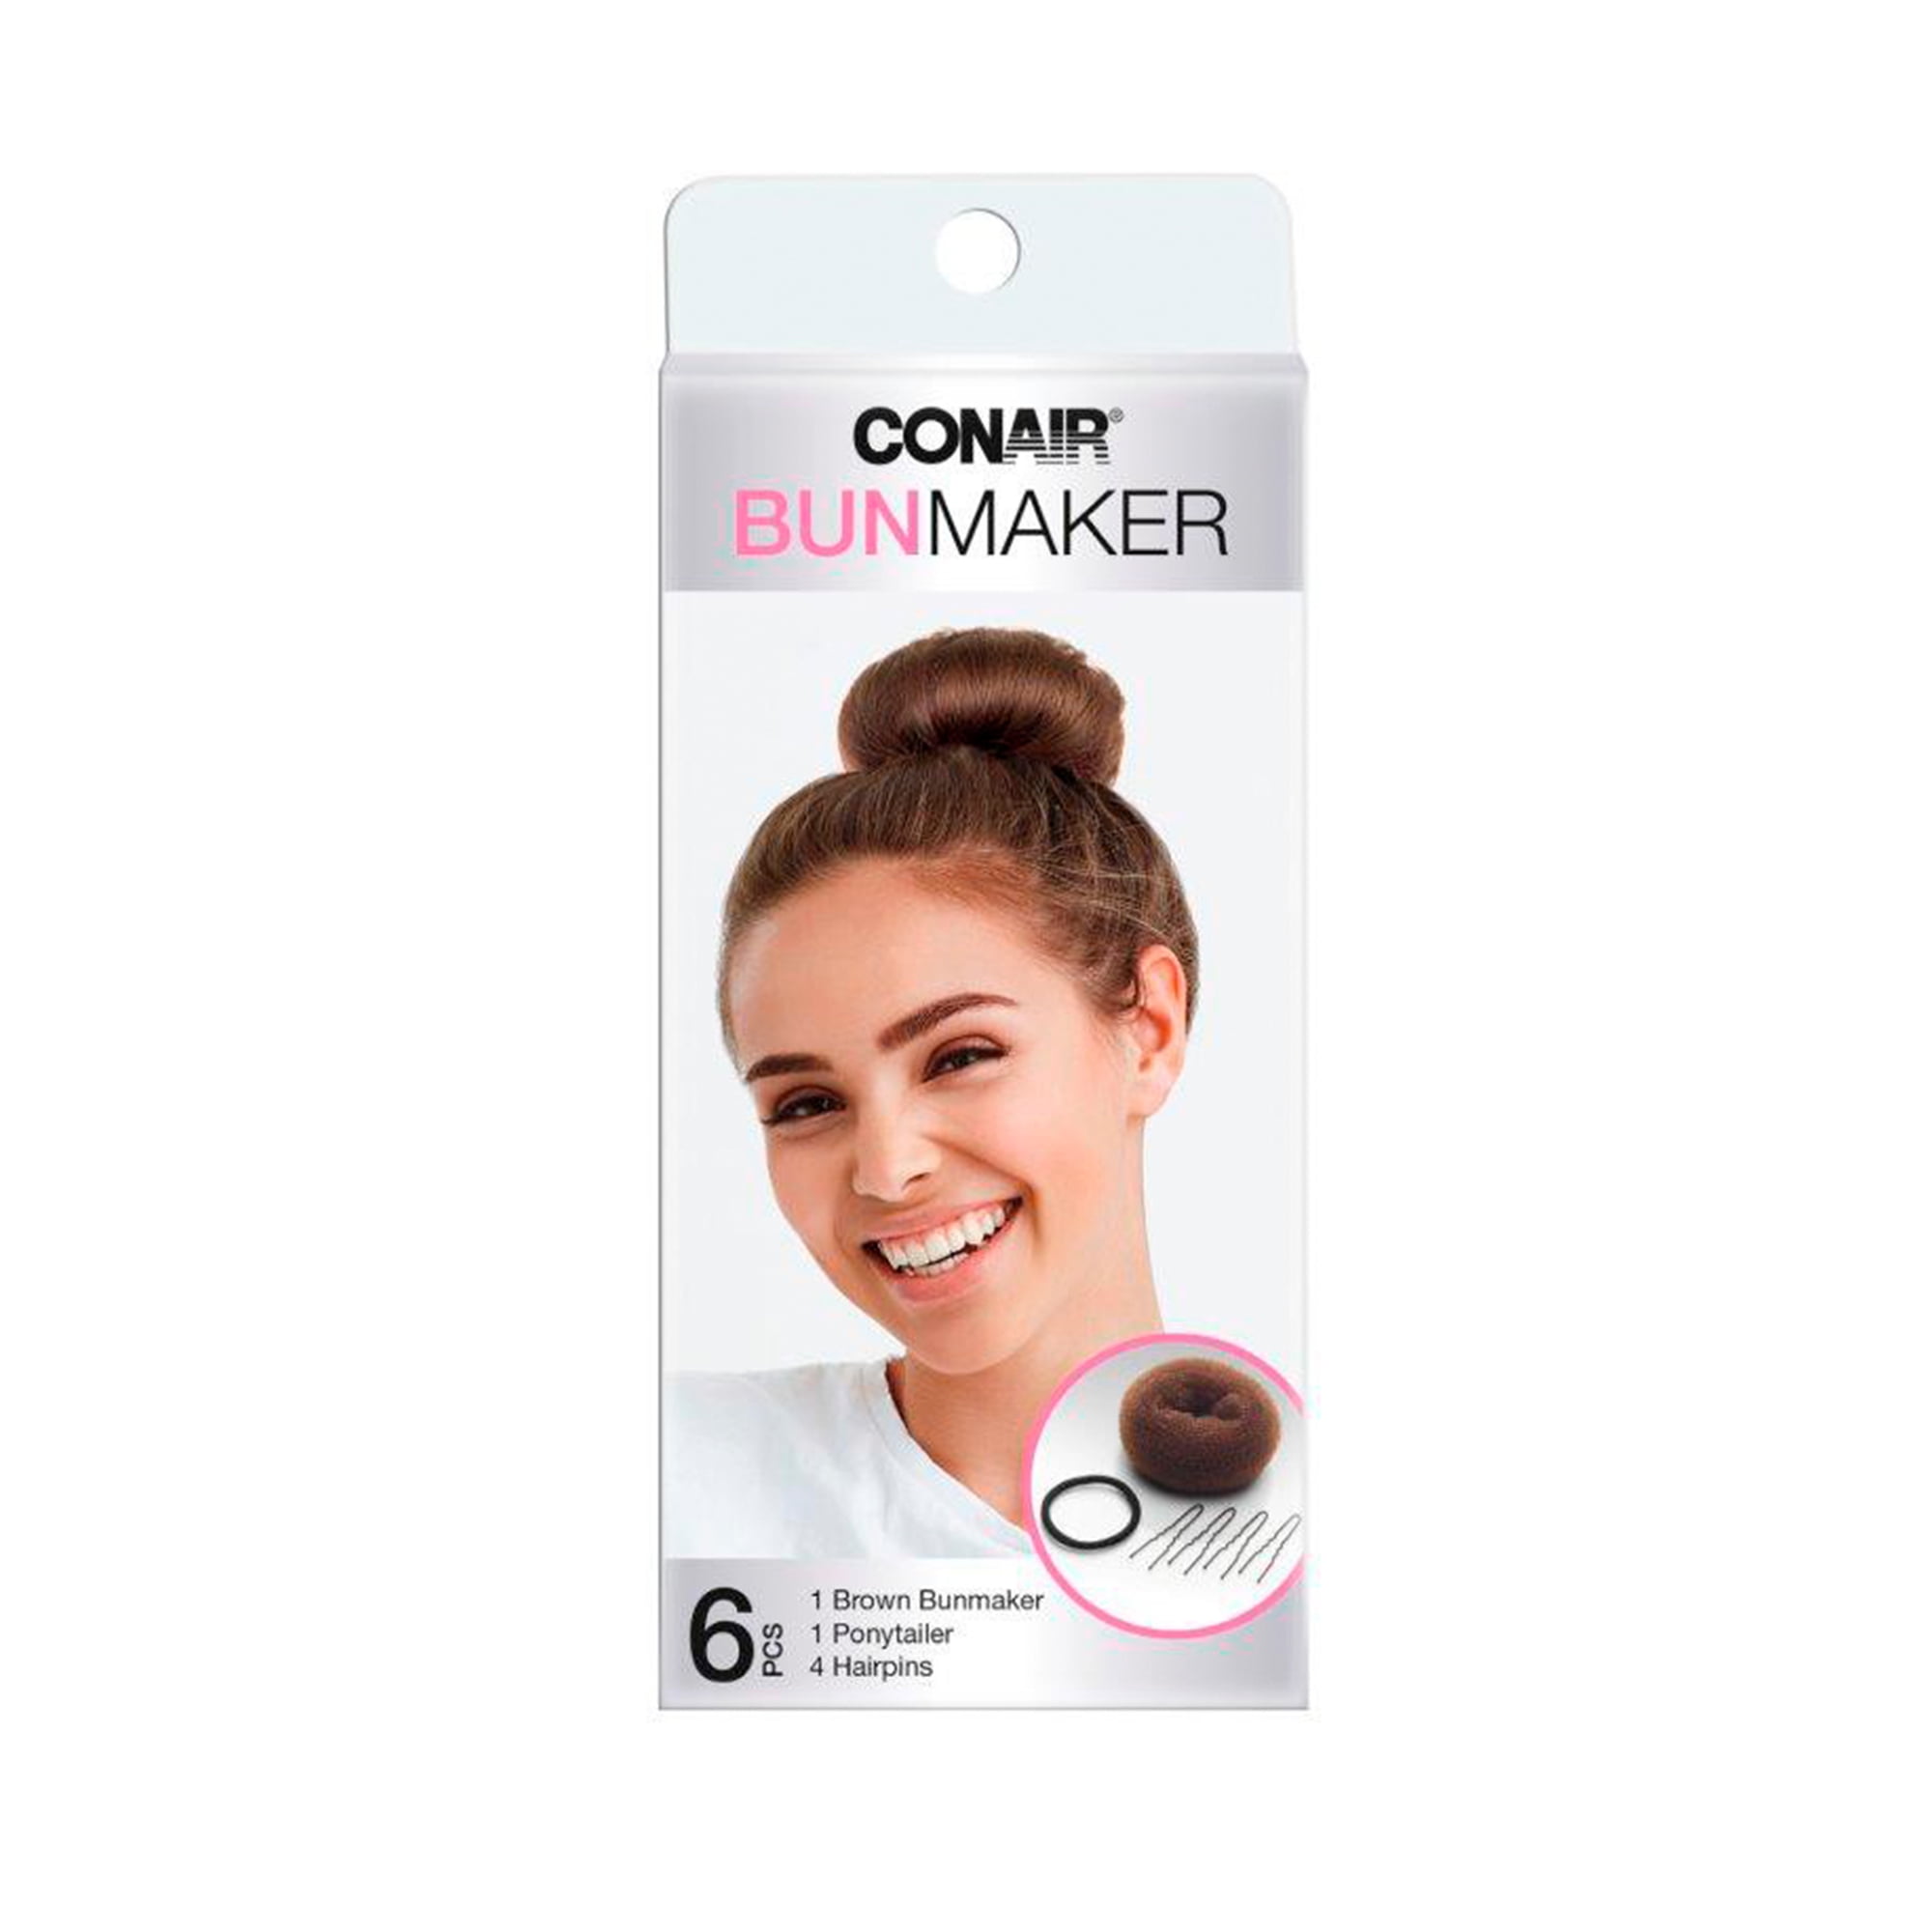 Conair Easy Updo Bun Making Kit with Updo Pins, Elastic, and Bunmaker, 6 Piece Kit